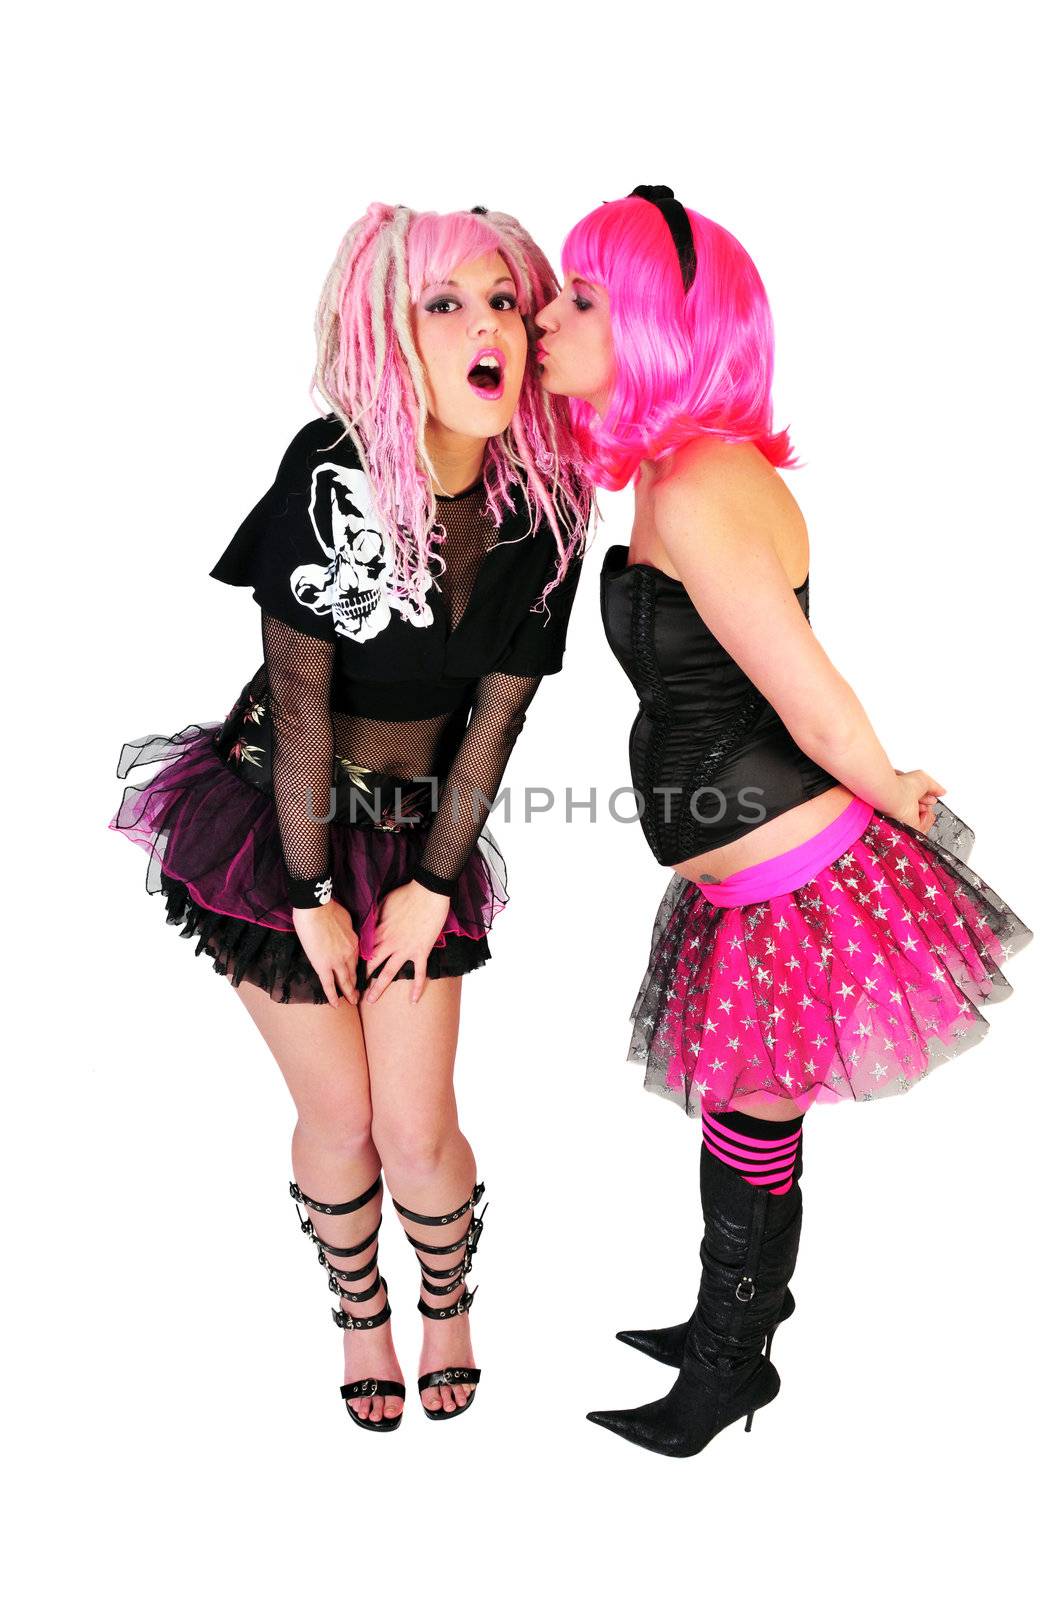 punk girls by PDImages